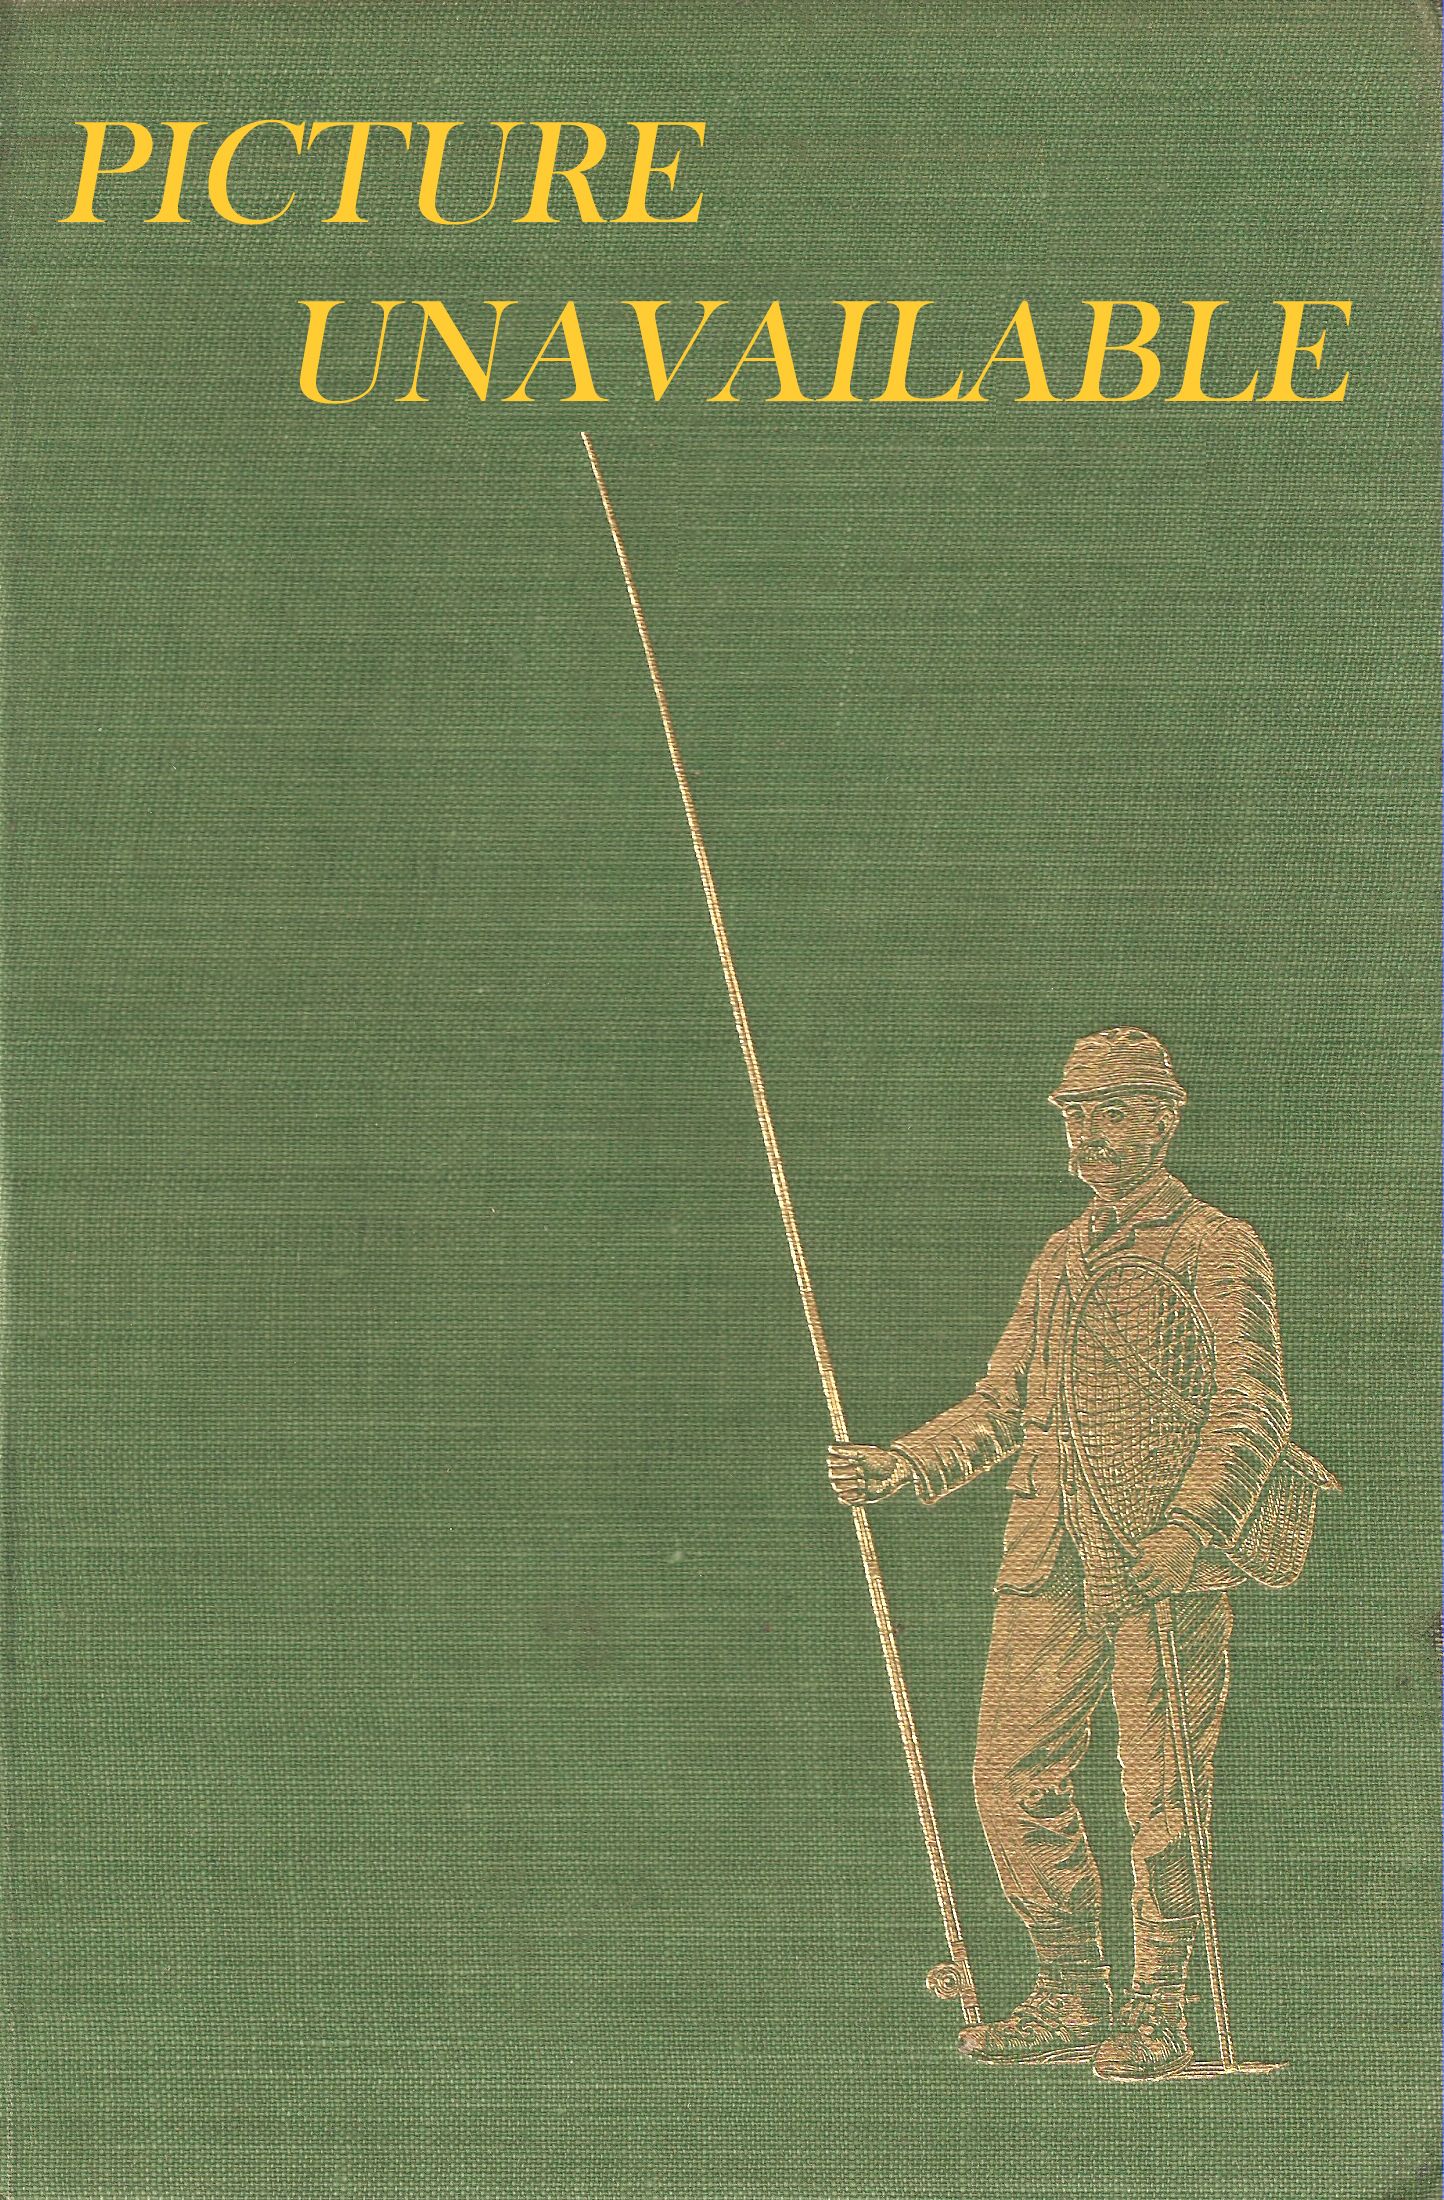 FISHING: ITS CAUSE, TREATMENT AND CURE. By H.T. Sheringham. Symptoms by  G.E. Studdy.